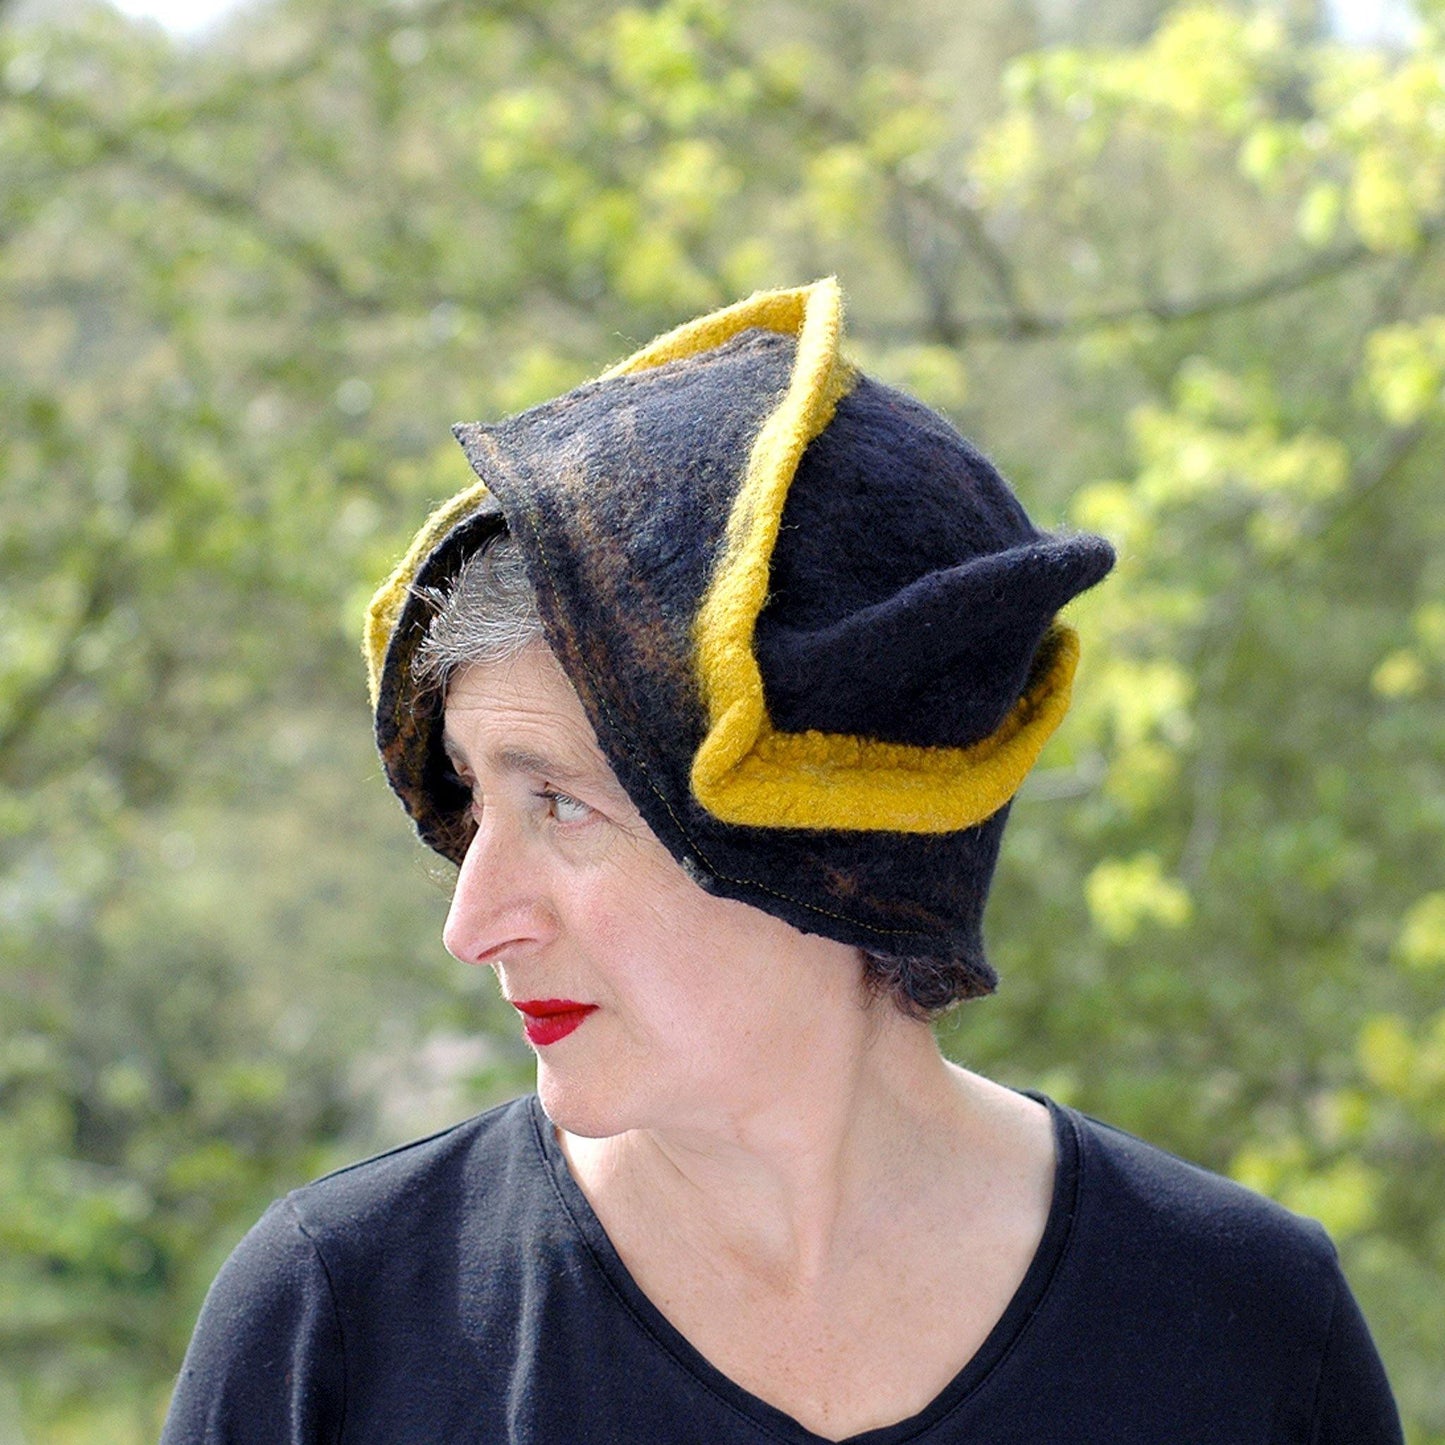 Black and Gold Wizard Hat for Pittsburgh or Hufflepuff Fans - outdoors